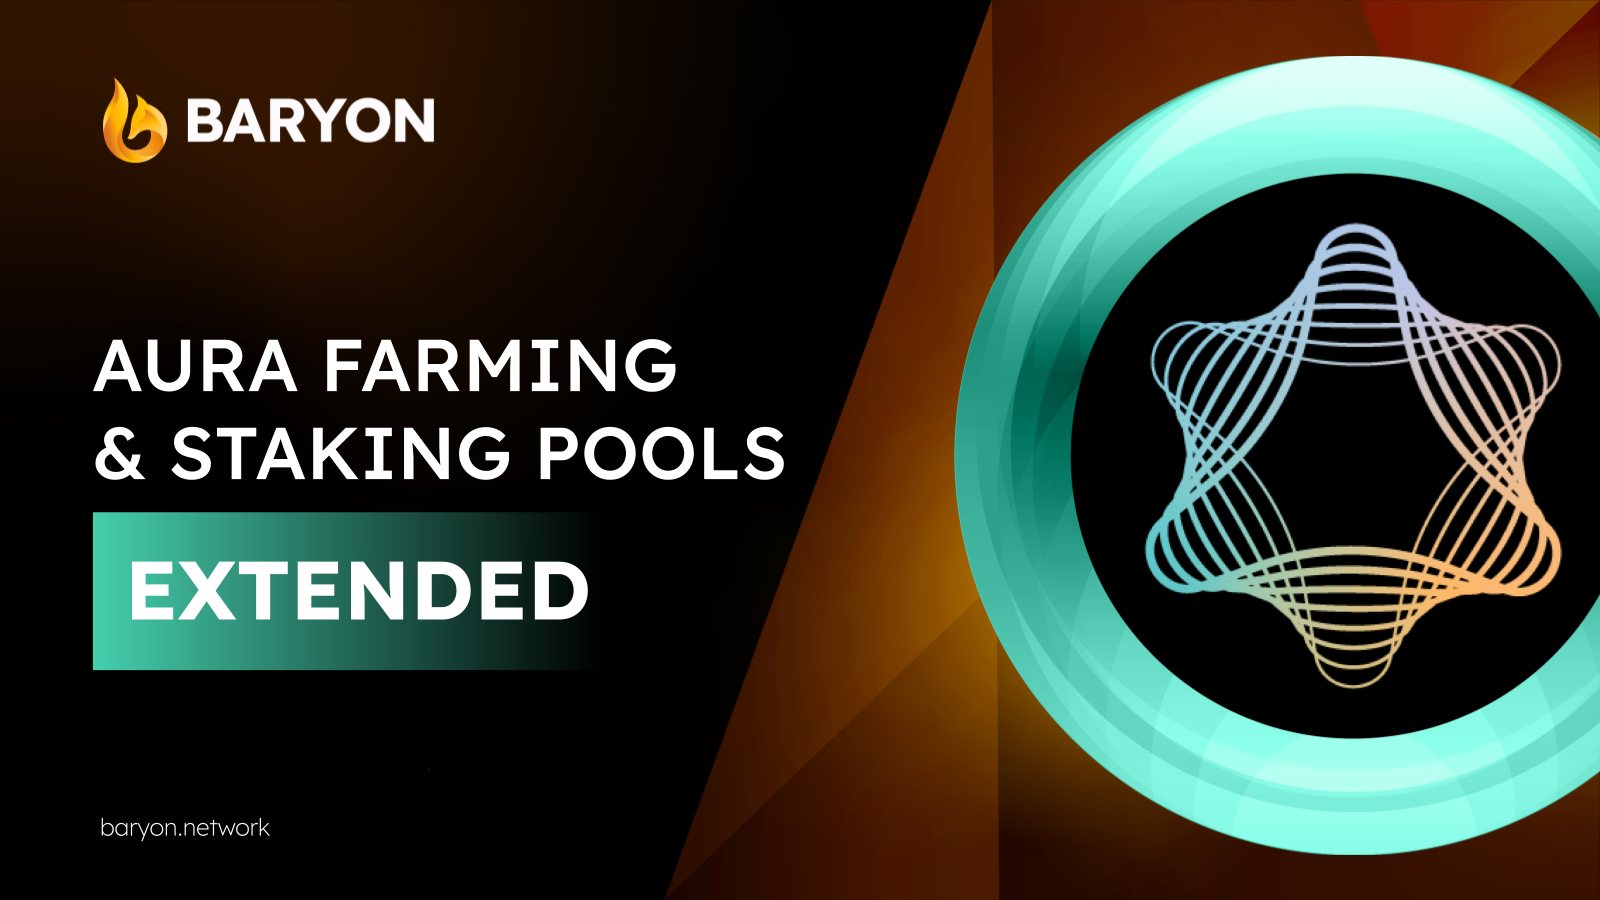 Aura Network extends farming and staking pools on Baryon